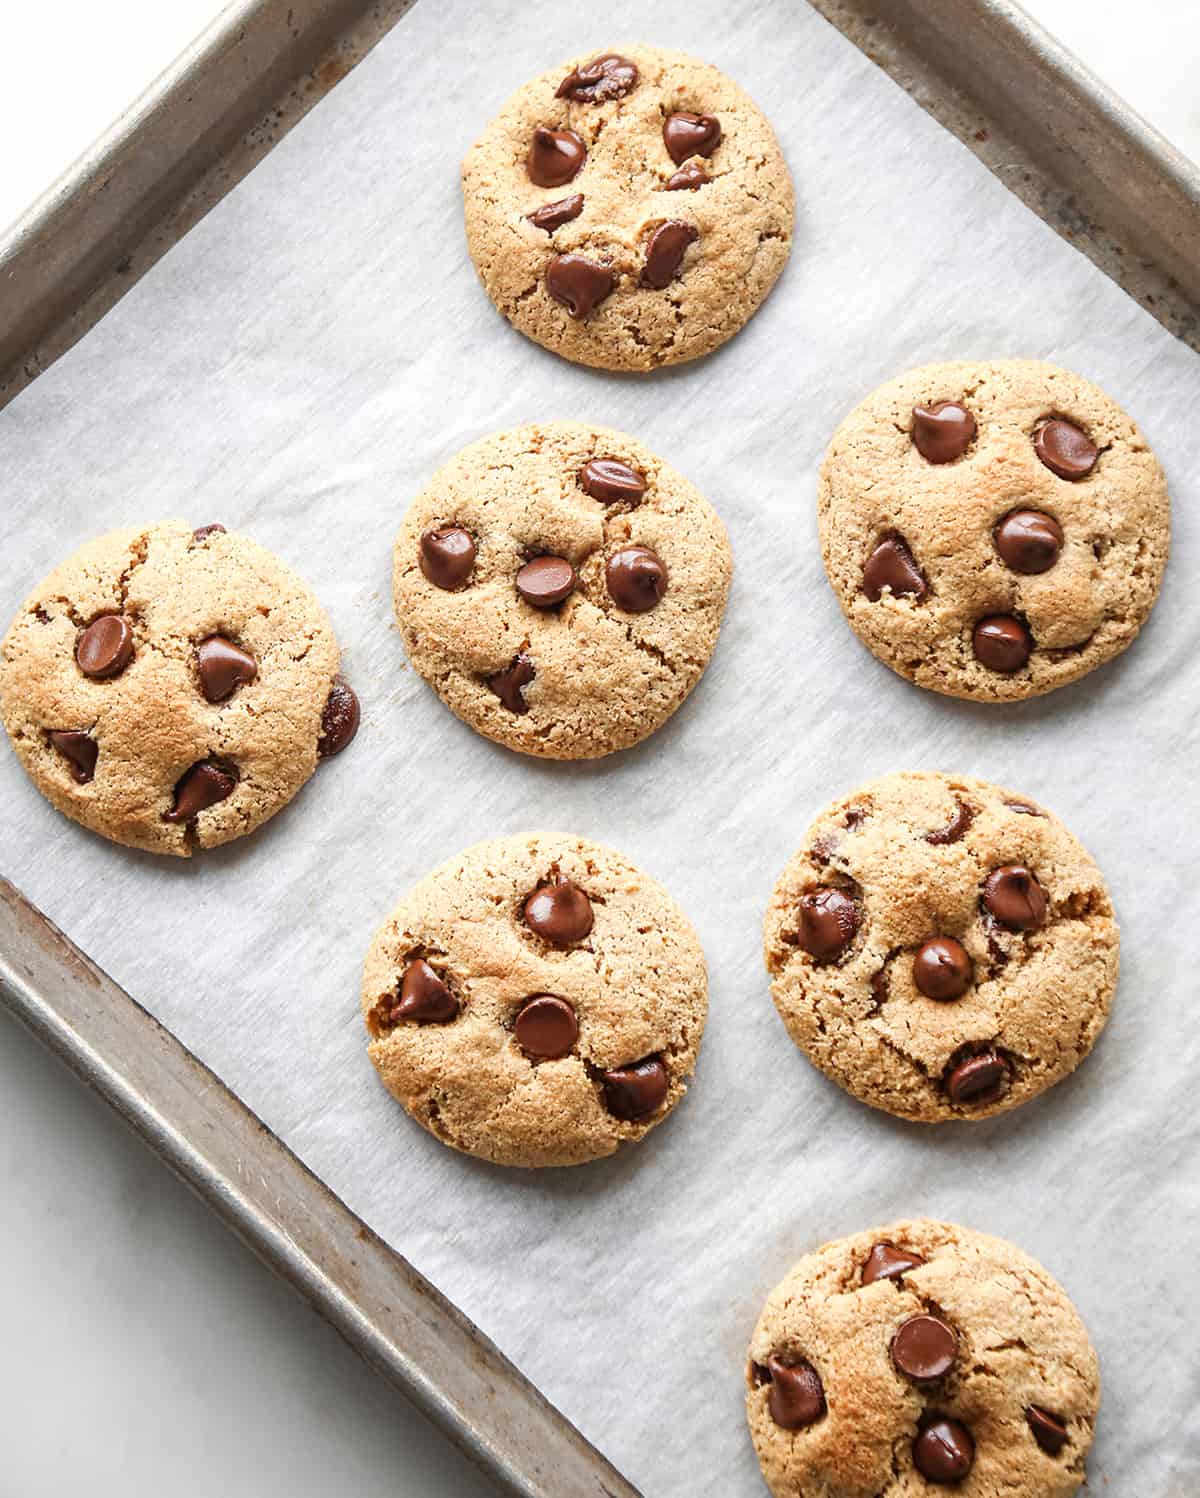 7 Paleo Chocolate Chip Cookies on a baking sheet lined with parchment paper